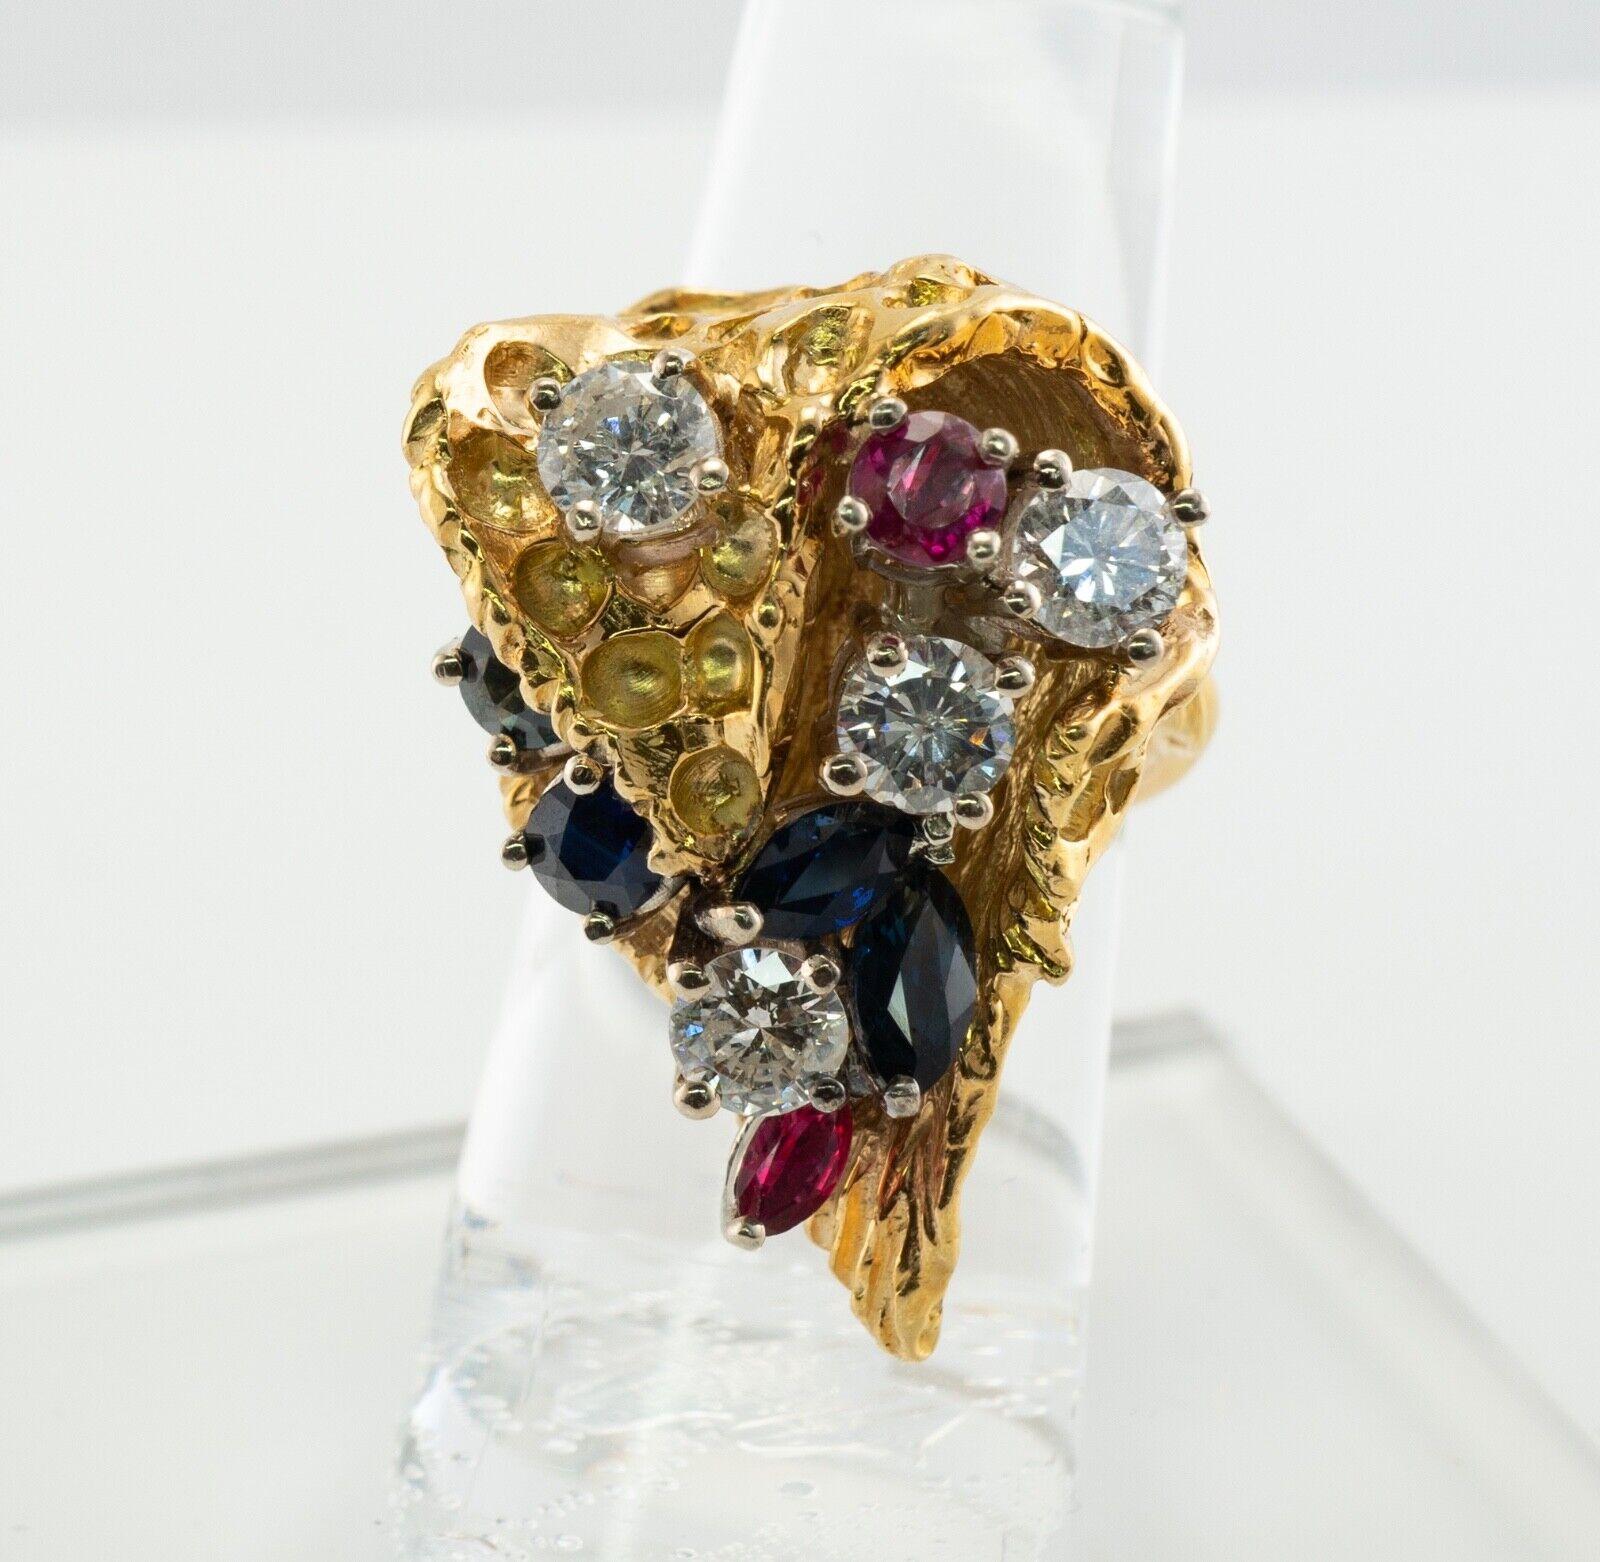 This gorgeous one of a kind vintage ring is crafted in solid 18K Yellow Gold. The textured highly detailed bucket setting holds four natural Diamonds, Ruby, and Sapphires. Three diamonds are .50 carat each, one gem is .40 carat. The grand total for